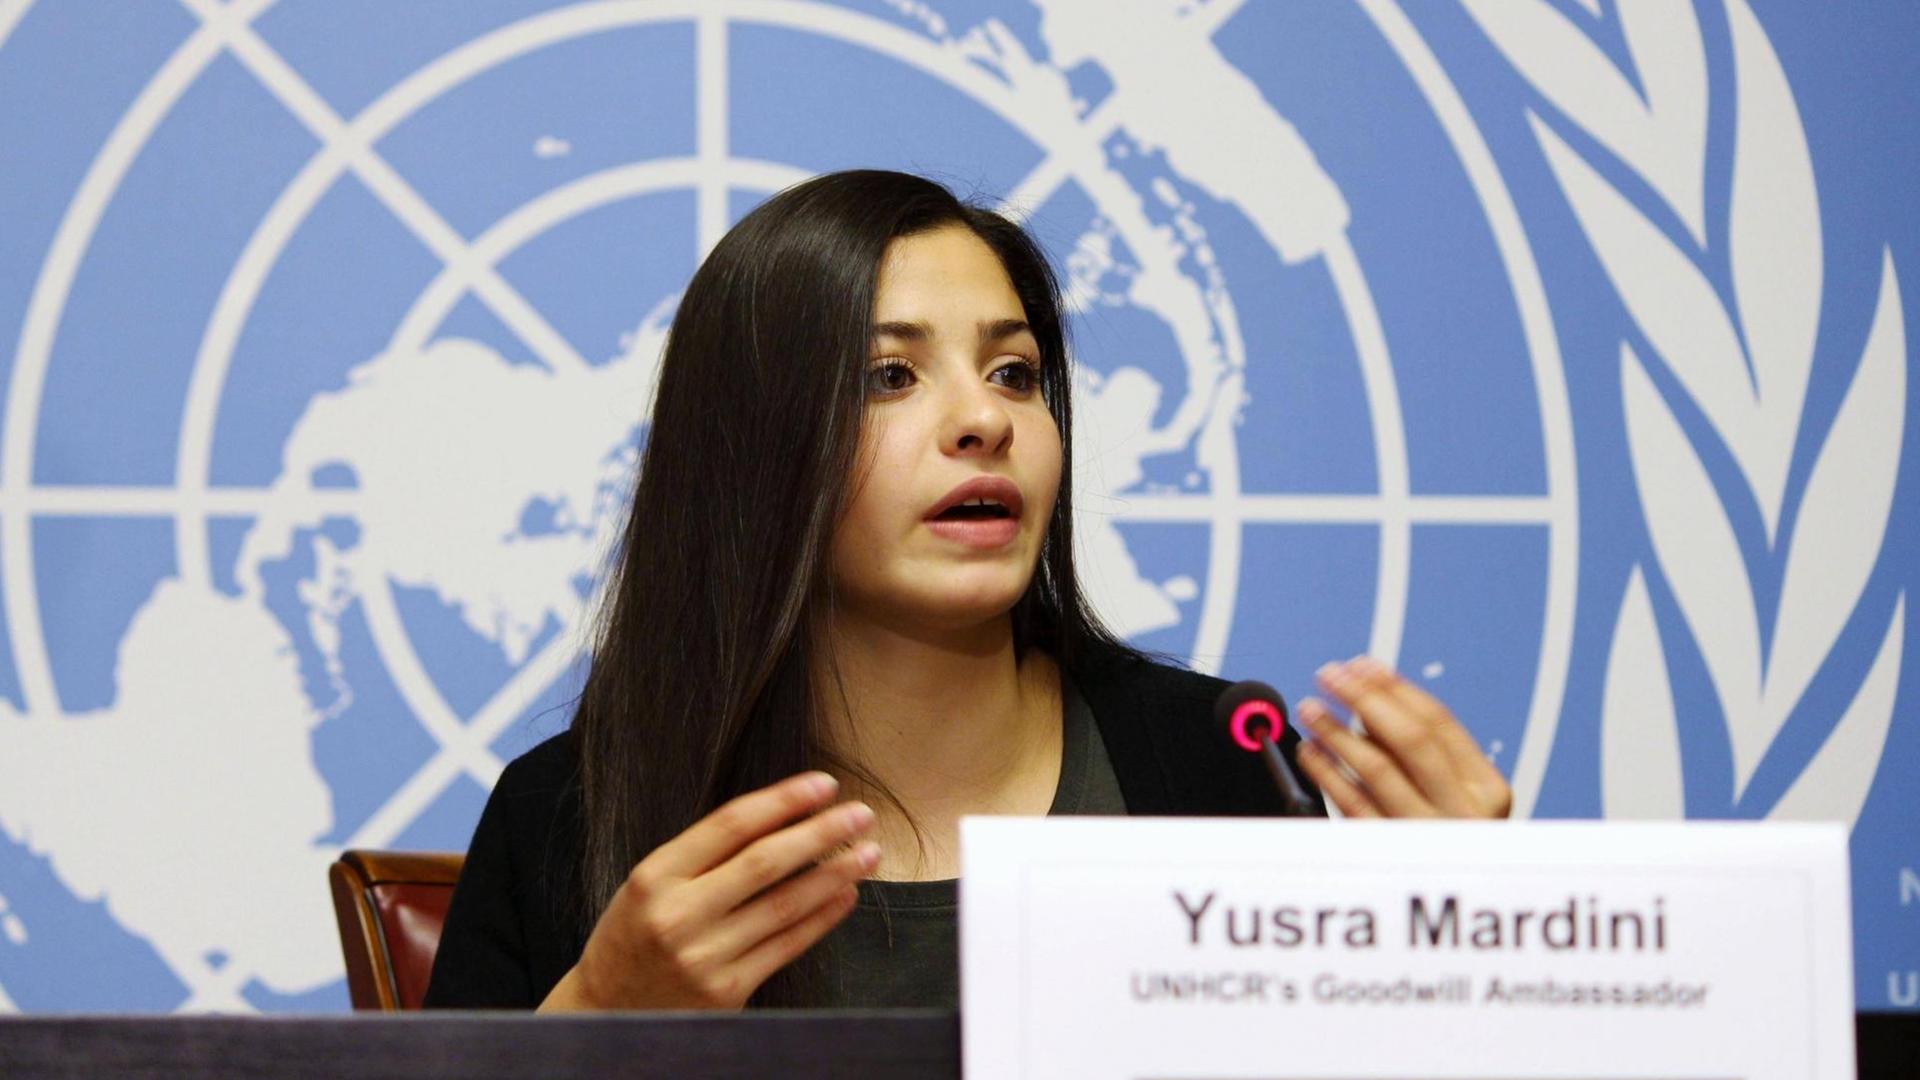 Syrian refugee swimmer becomes UNHCR goodwill envoy Yusra Mardini, a 19-year-old Syrian refugee and an Olympic swimmer, speaks at a news conference in Geneva on April 27, 2017 after being appointed as a UNHCR Goodwill Ambassador. Mardini, who jumped overboard and swam for hours alongside an overloaded boat to reach Greece from Turkey in 2015, took part in the women s 100-meter butterfly as part of the first-ever Refugee Olympic Team at the Rio Olympics. PUBLICATIONxINxGERxSUIxAUTxHUNxONLY Syrian refugee Swimmer becomes UNHCR Goodwill Envoy Yusra Mardini A 19 Year Old Syrian refugee and to Olympic Swimmer Speaks AT A News Conference in Geneva ON April 27 2017 After Being appointed AS A UNHCR Goodwill Ambassador Mardini Who Jumped overboard and swam for Hours alongside to Boat to REACH Greece From Turkey in 2015 took Part in The Women s 100 Metres Butterfly AS Part of The First ever refugee Olympic team AT The Rio Olympics PUBLICATIONxINxGERxSUIxAUTxHUNxONLY